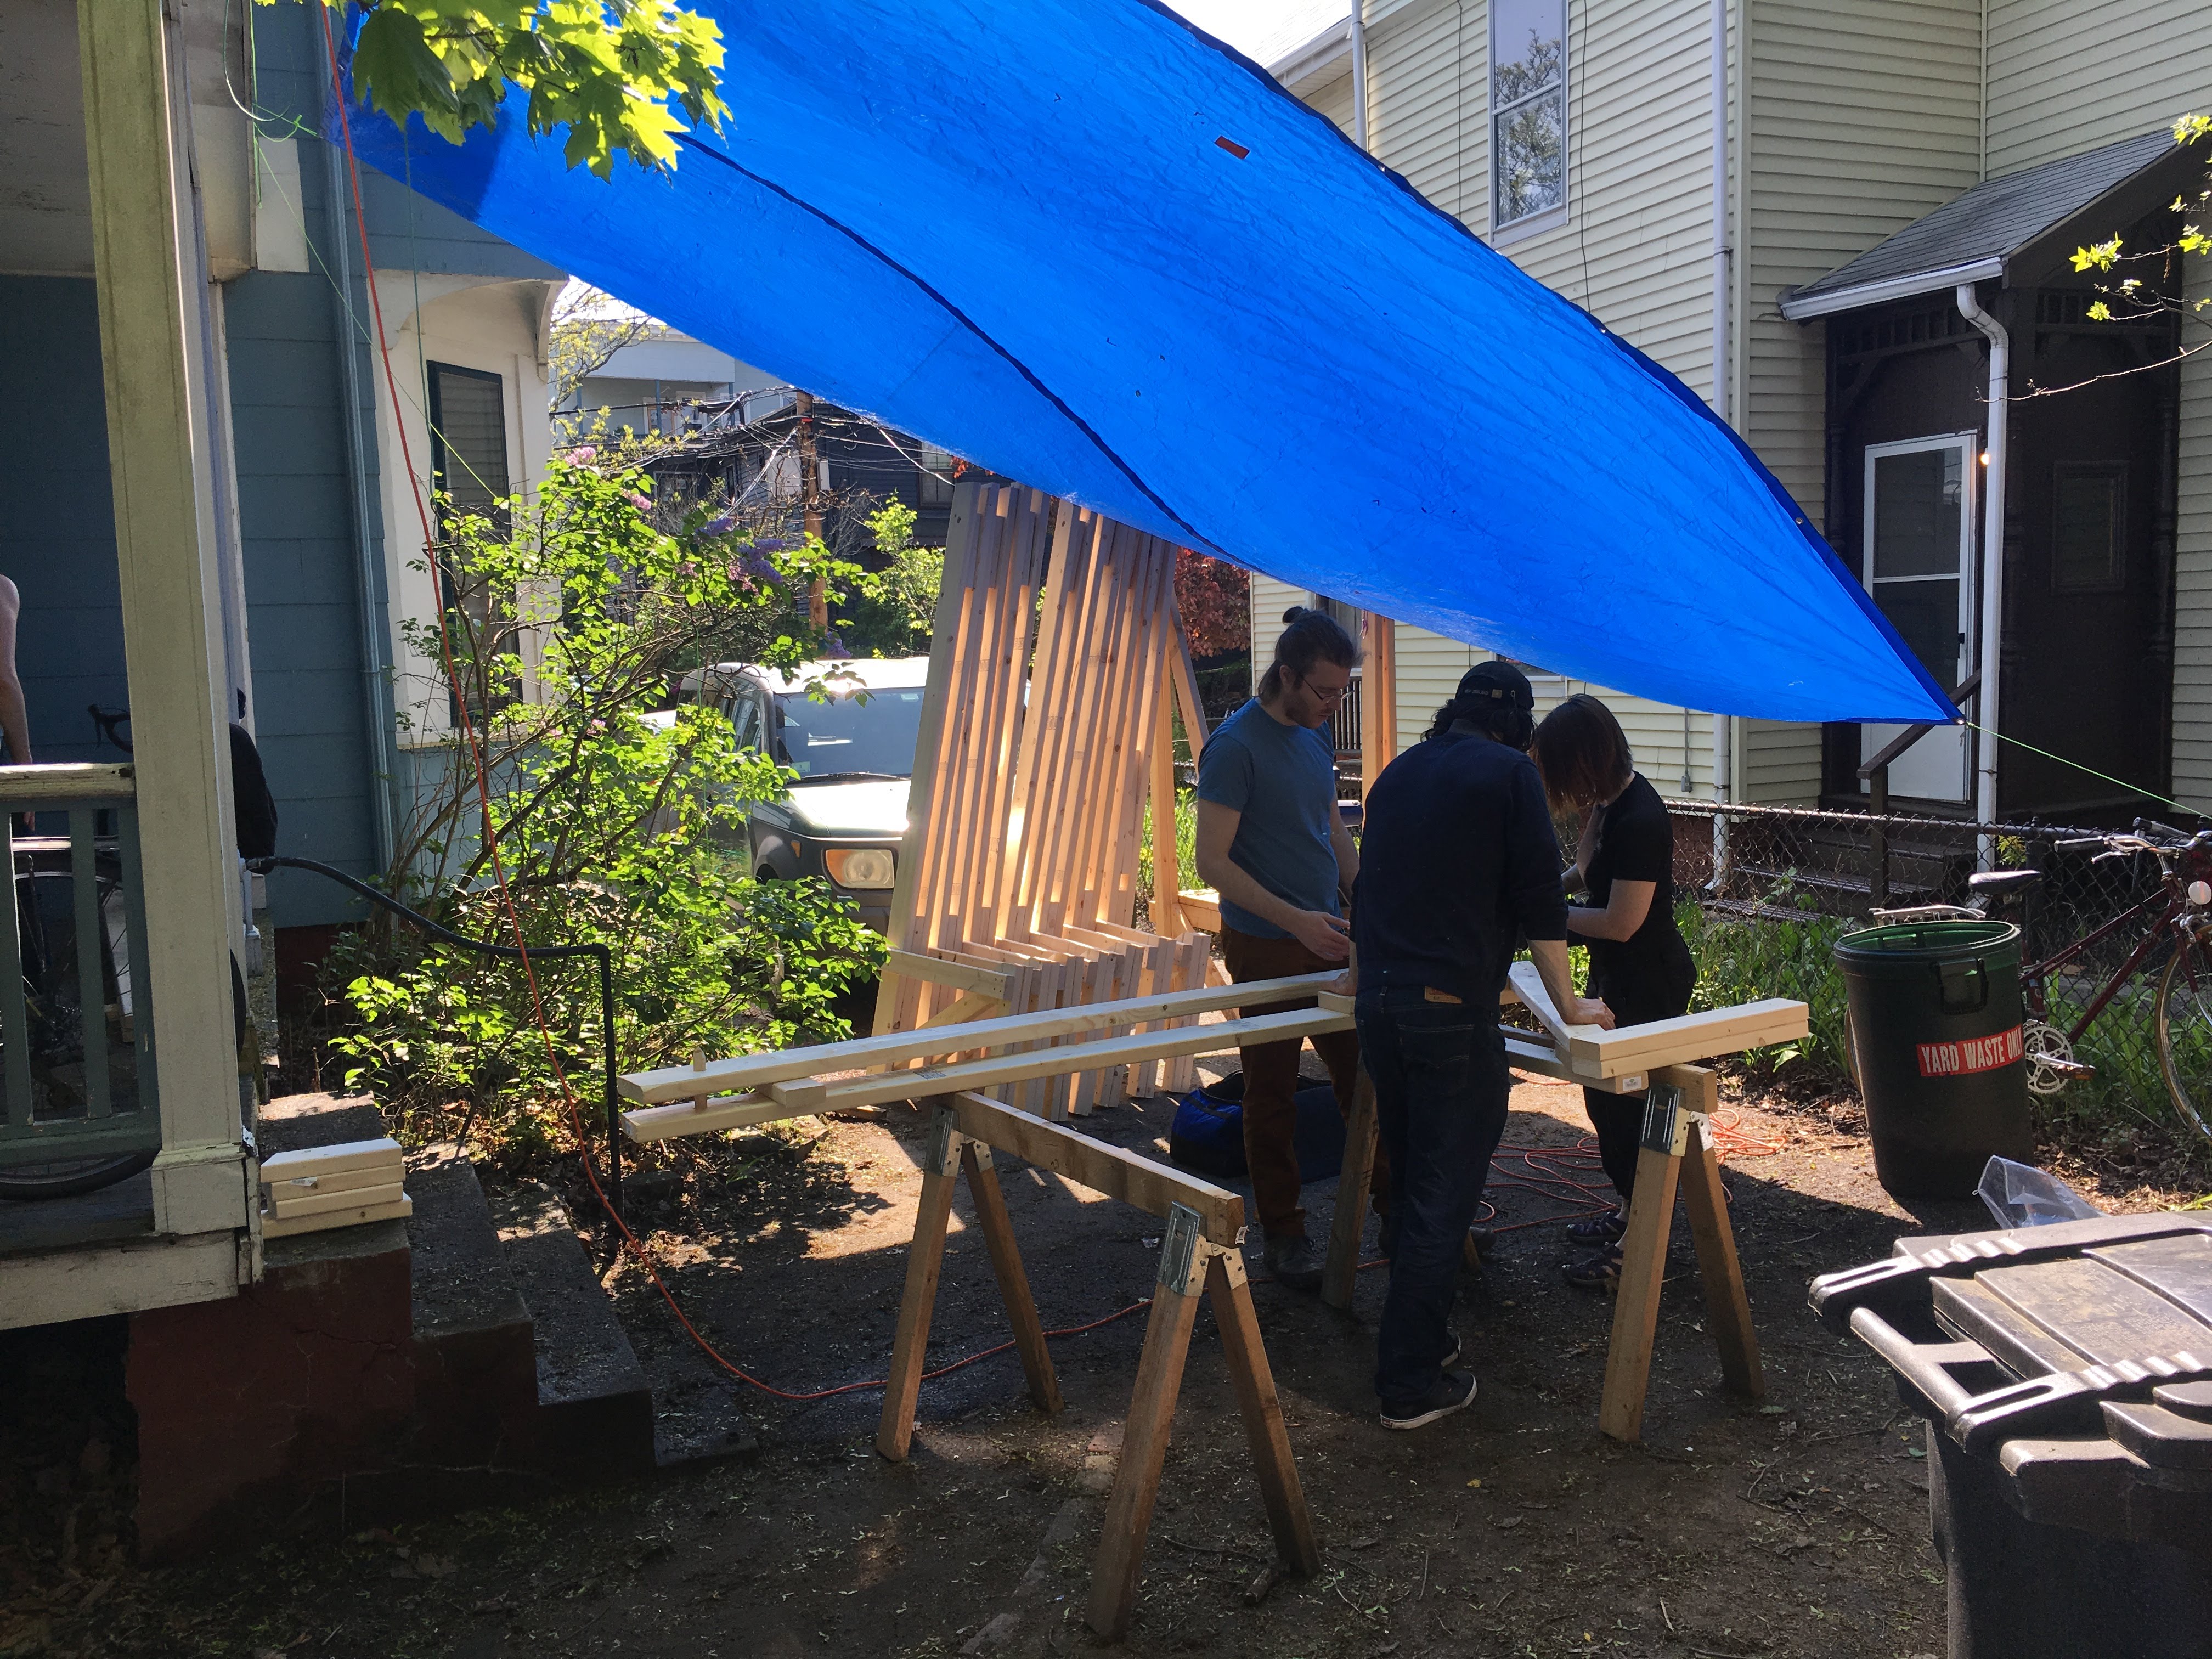 Crew members work wooden boards on sawhorses under a canopy